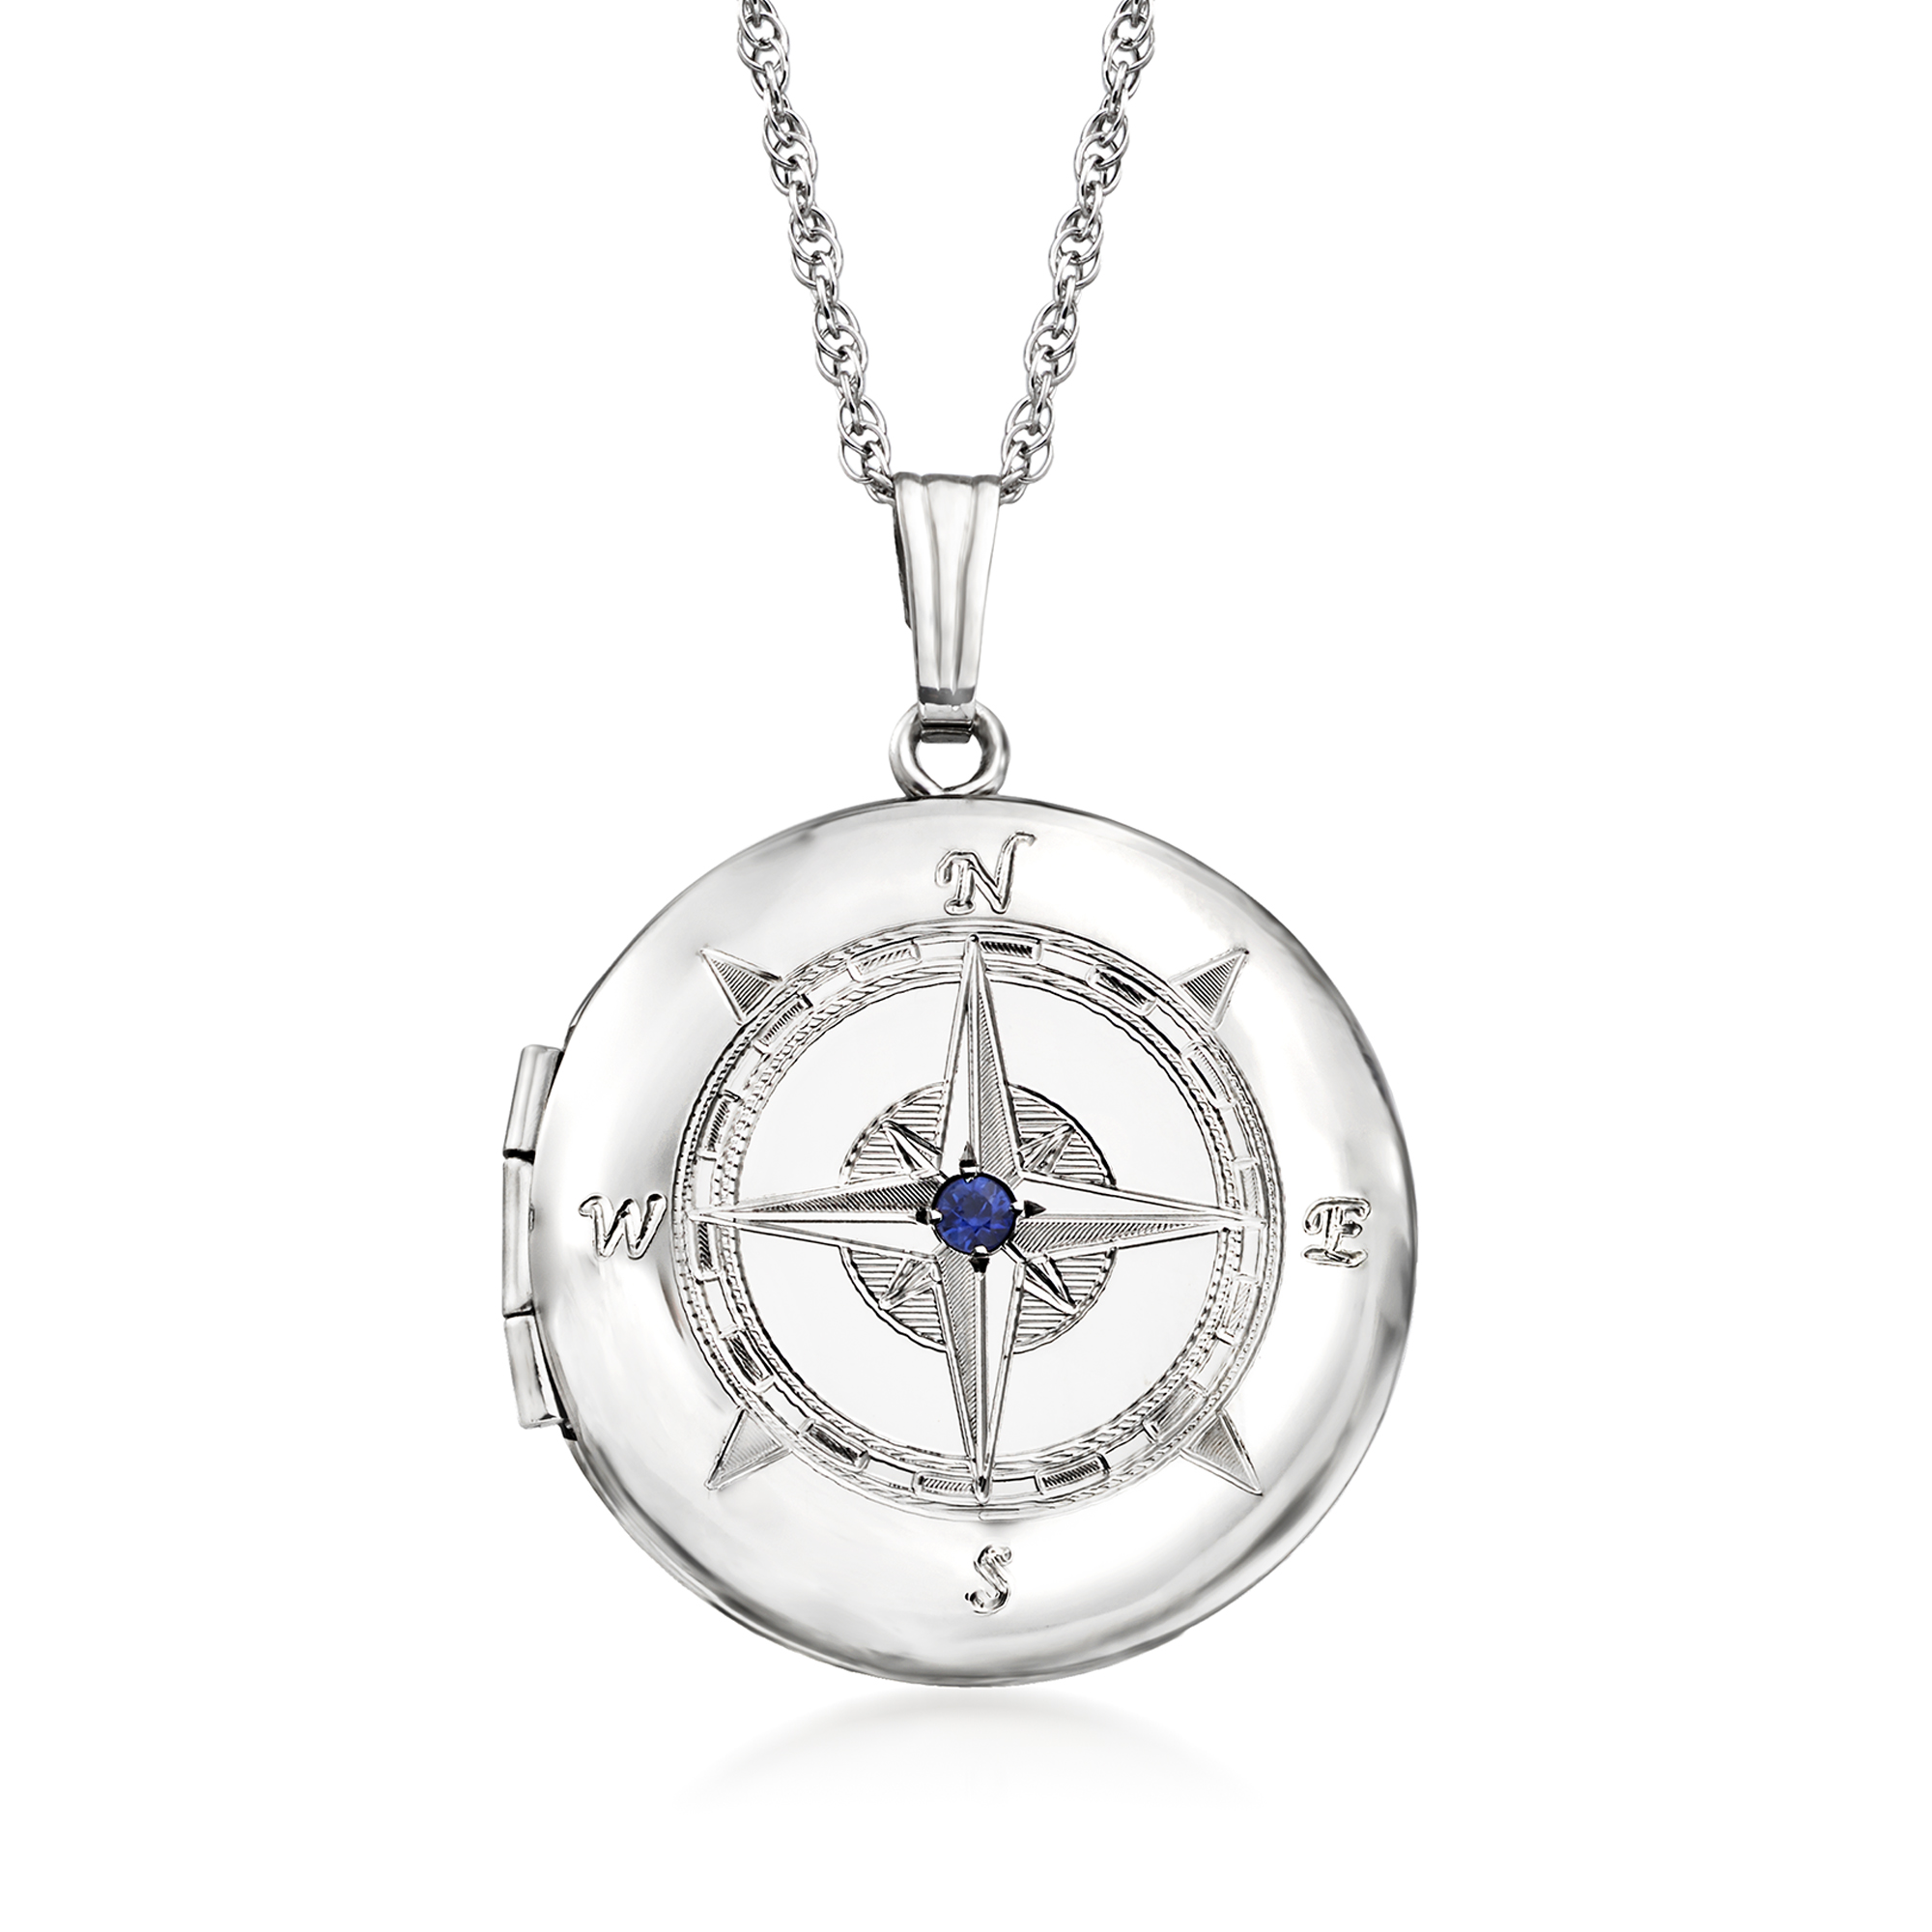 Sterling Silver Compass Locket Necklace with Sapphire Accent | Ross-Simons